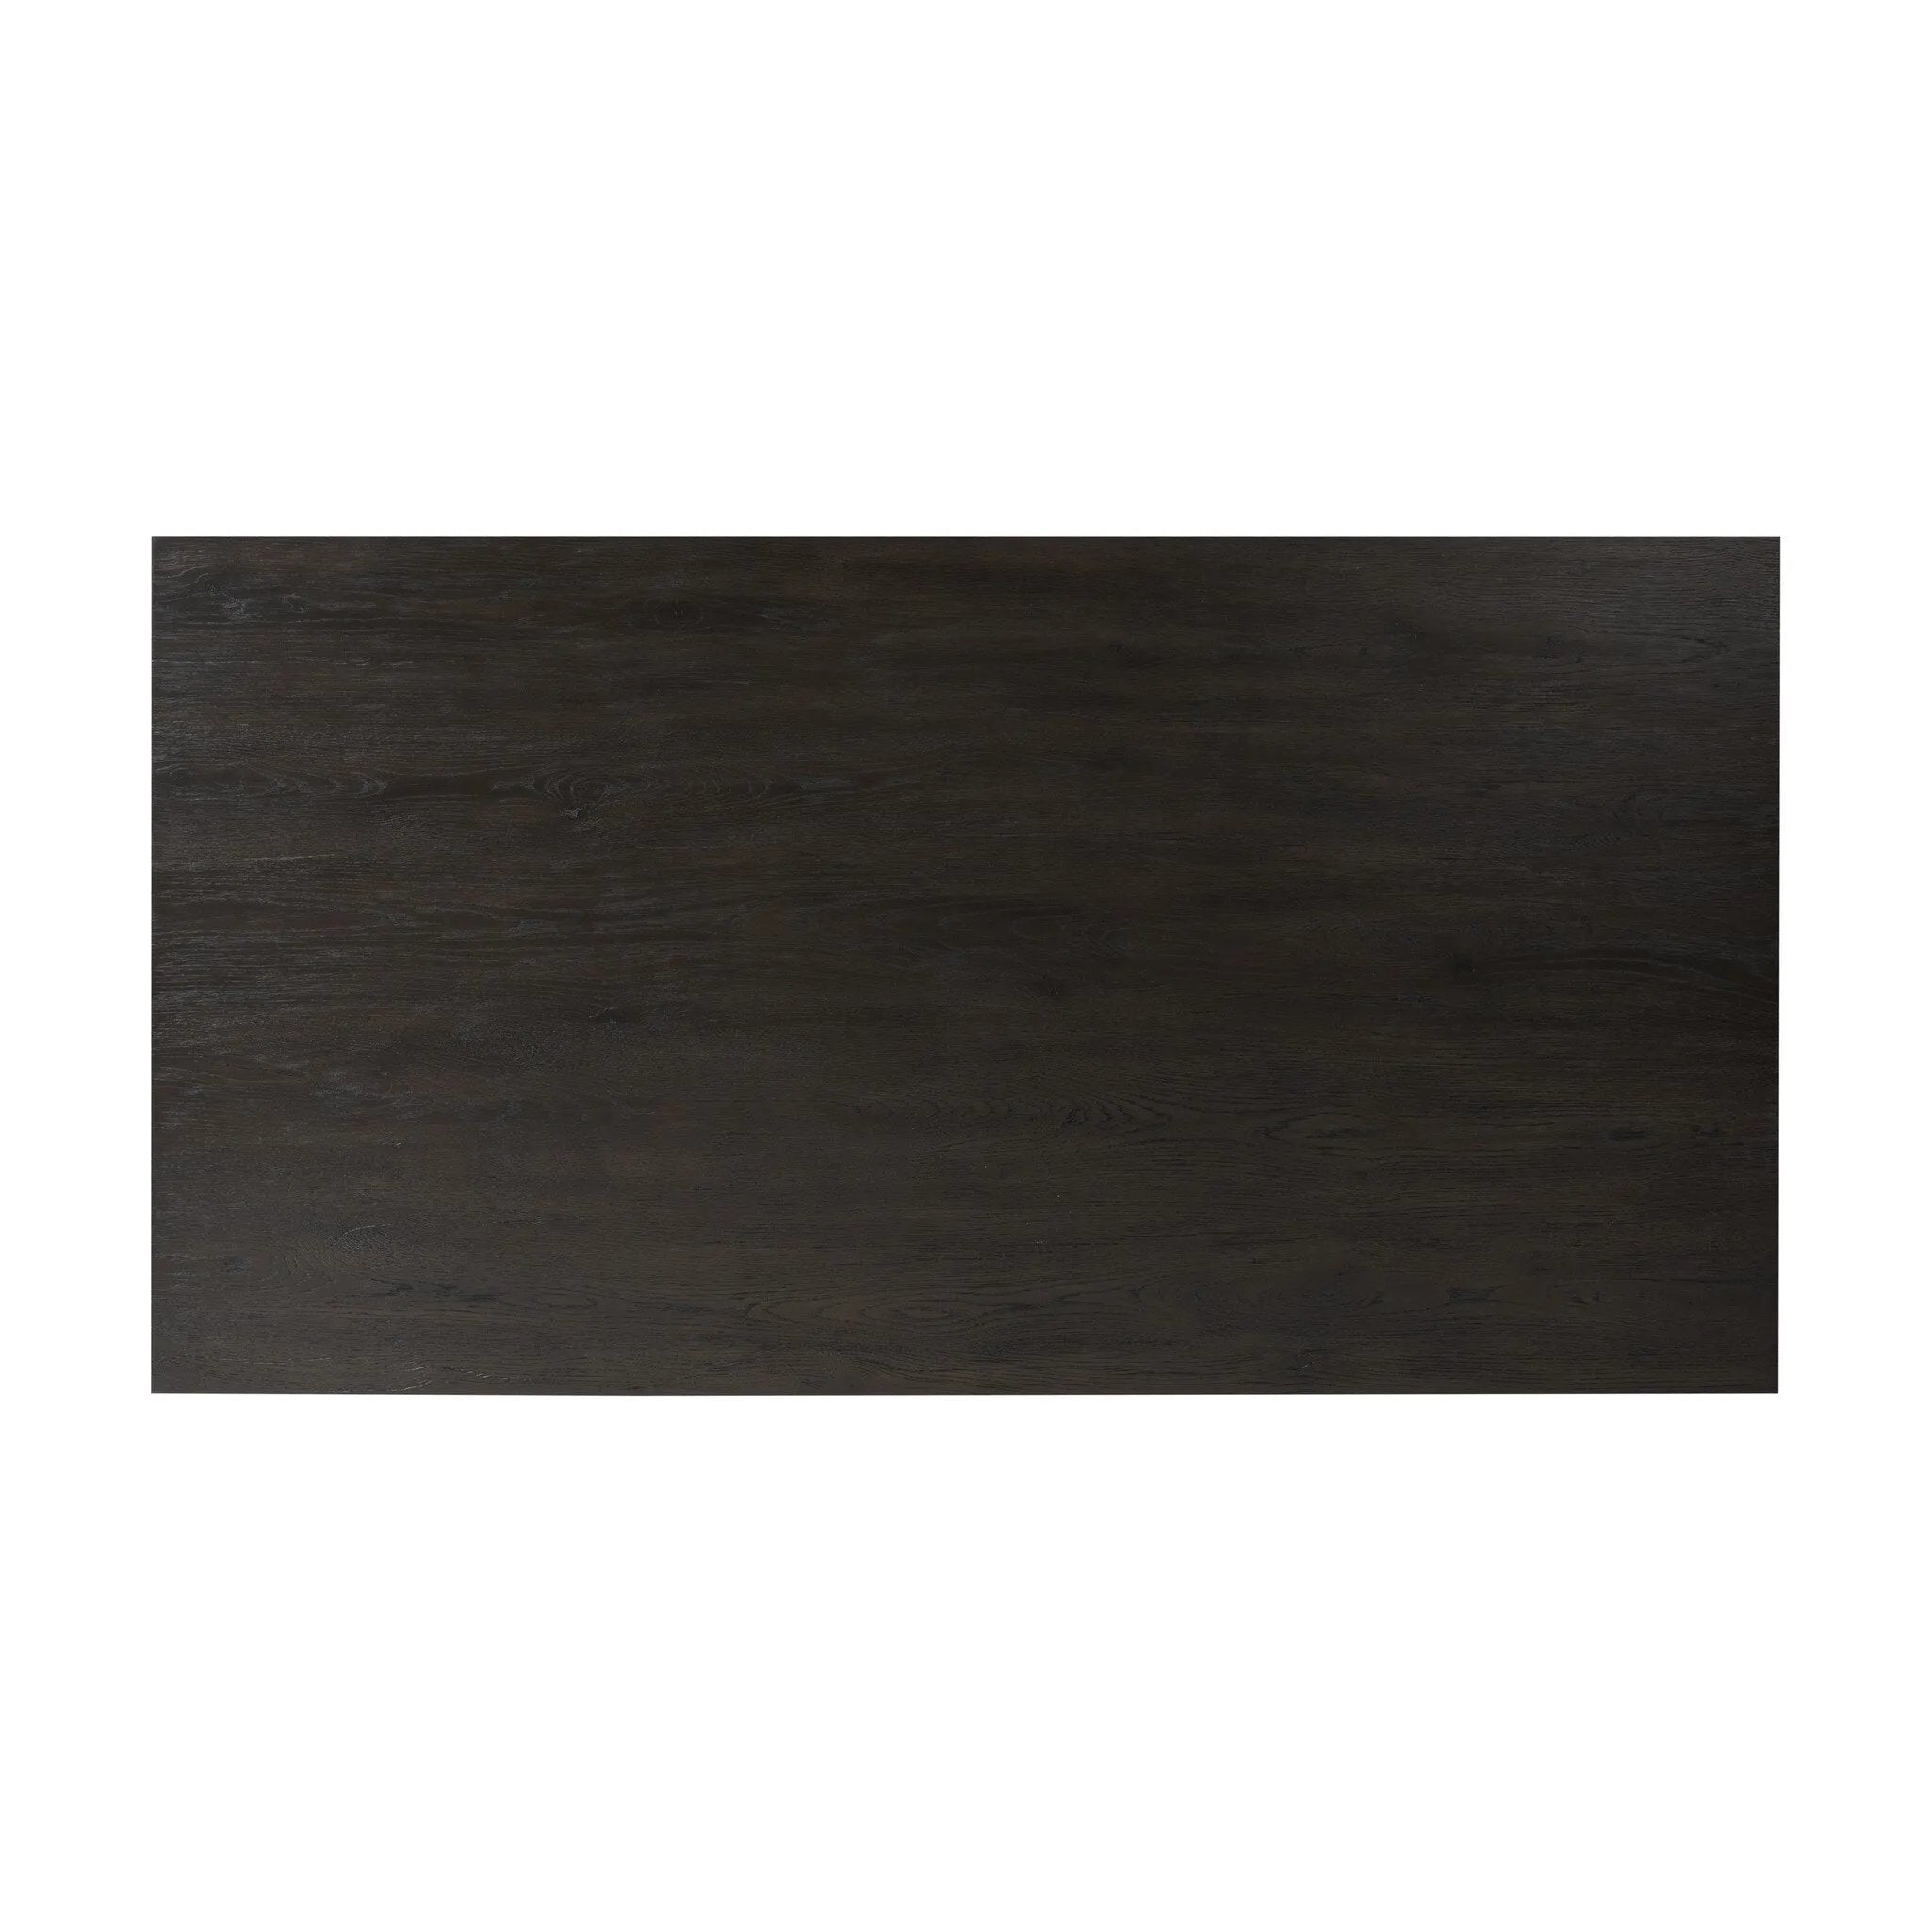 A smoked black finish delivers a character-rich look to a rectangular coffee table. Angled panel legs up the intrigue factor.Collection: Haide Amethyst Home provides interior design, new home construction design consulting, vintage area rugs, and lighting in the Salt Lake City metro area.